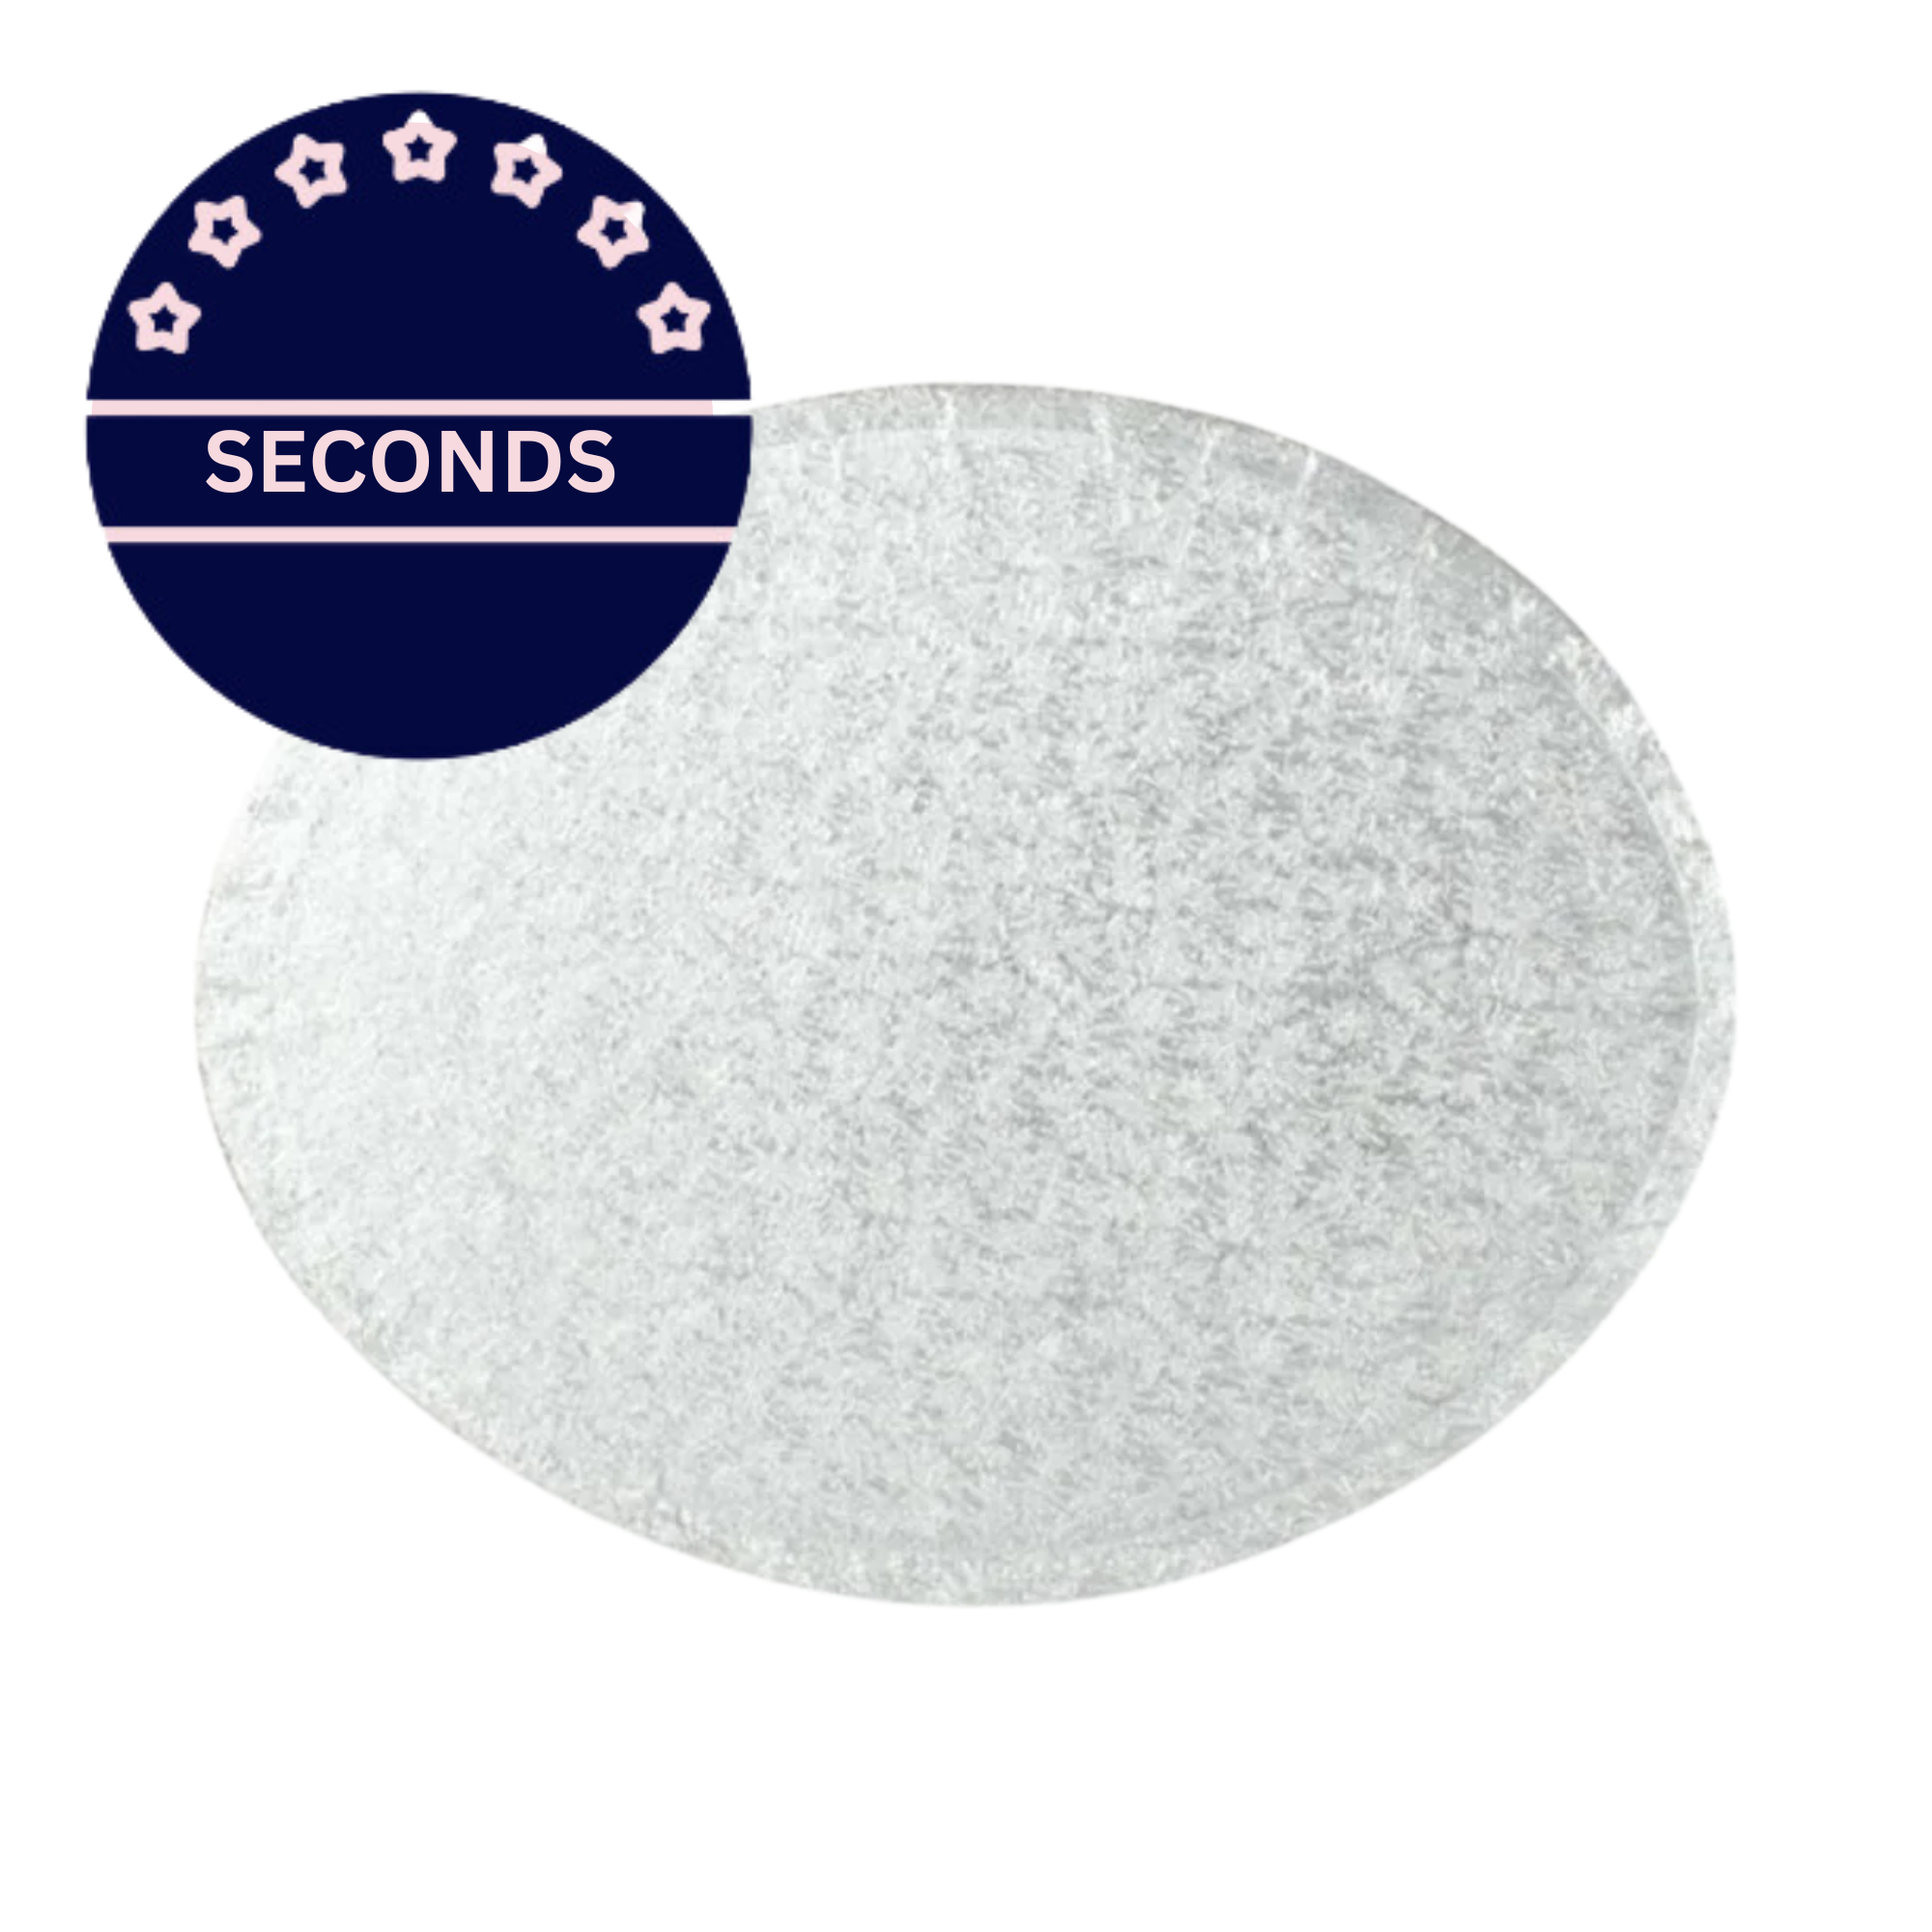 SECONDS - Oval Cake Drum 12mm Thick Cake Board - Silver - 10" x 8"